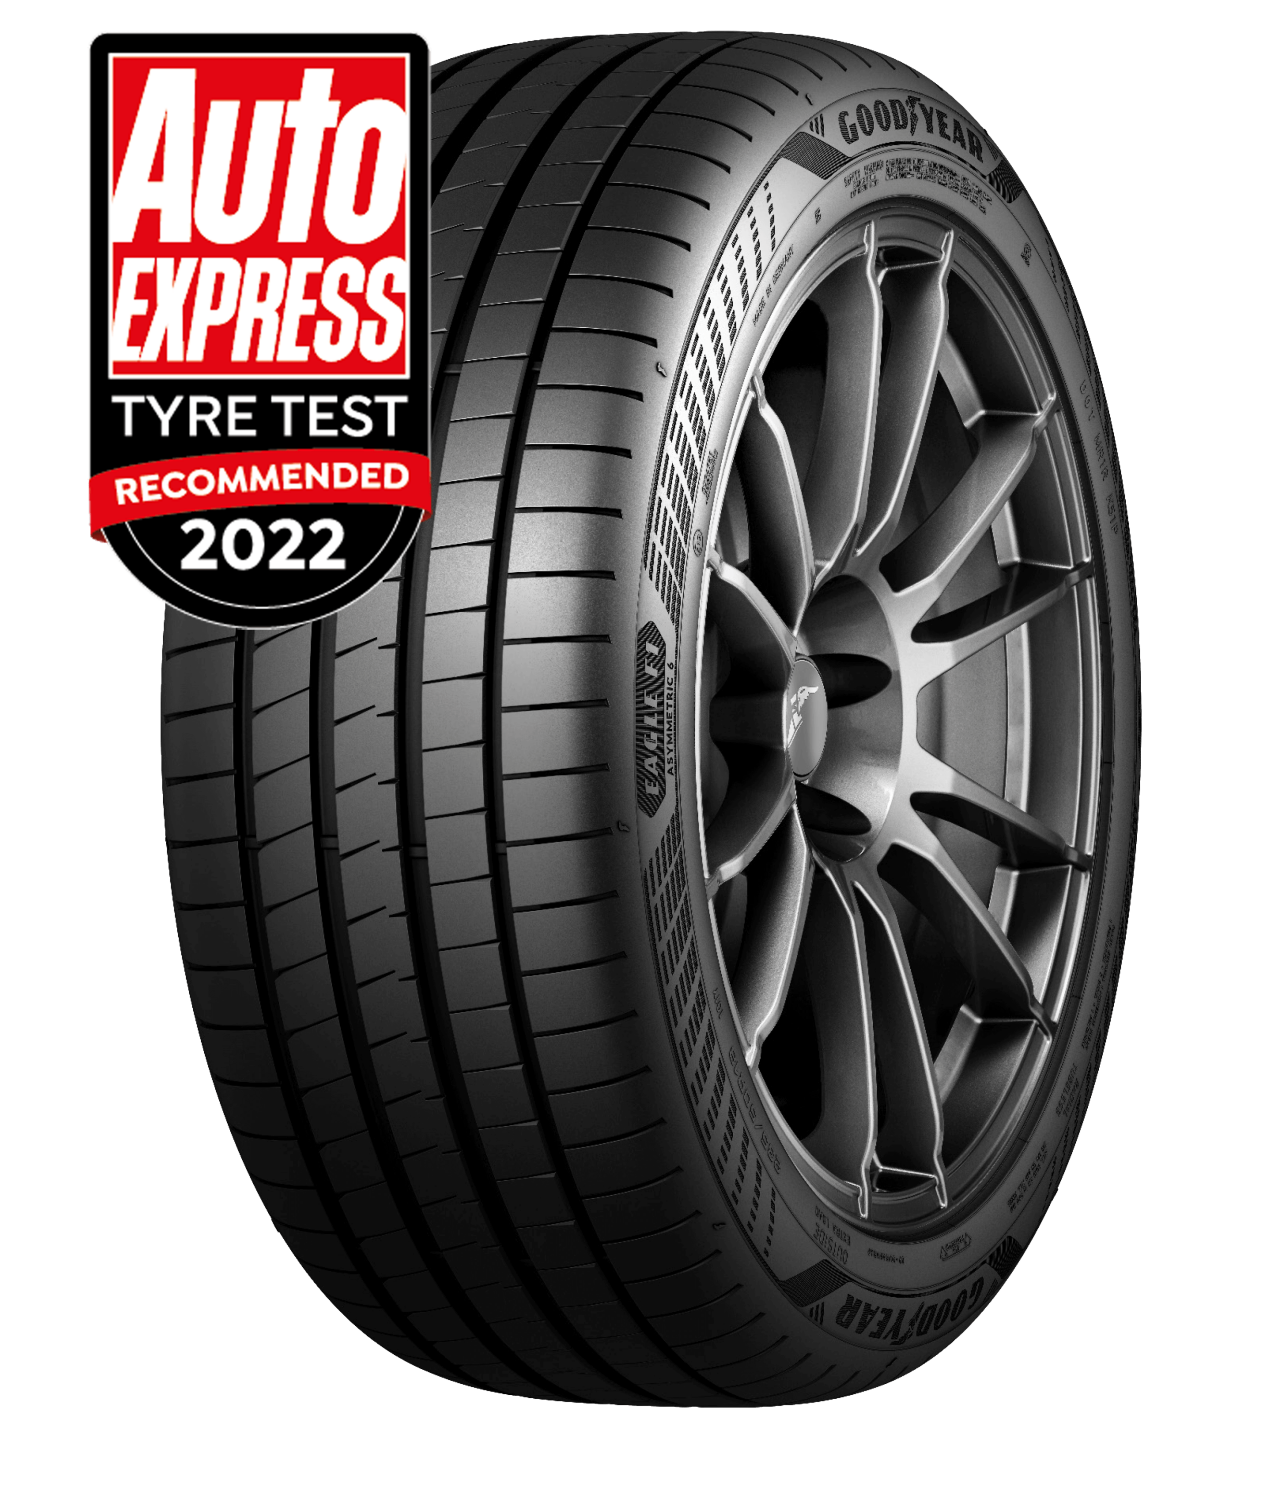 Eagle F1 Asymmetric 6 tyre - Auto Express Summer Tyre Test 2022 Recommended